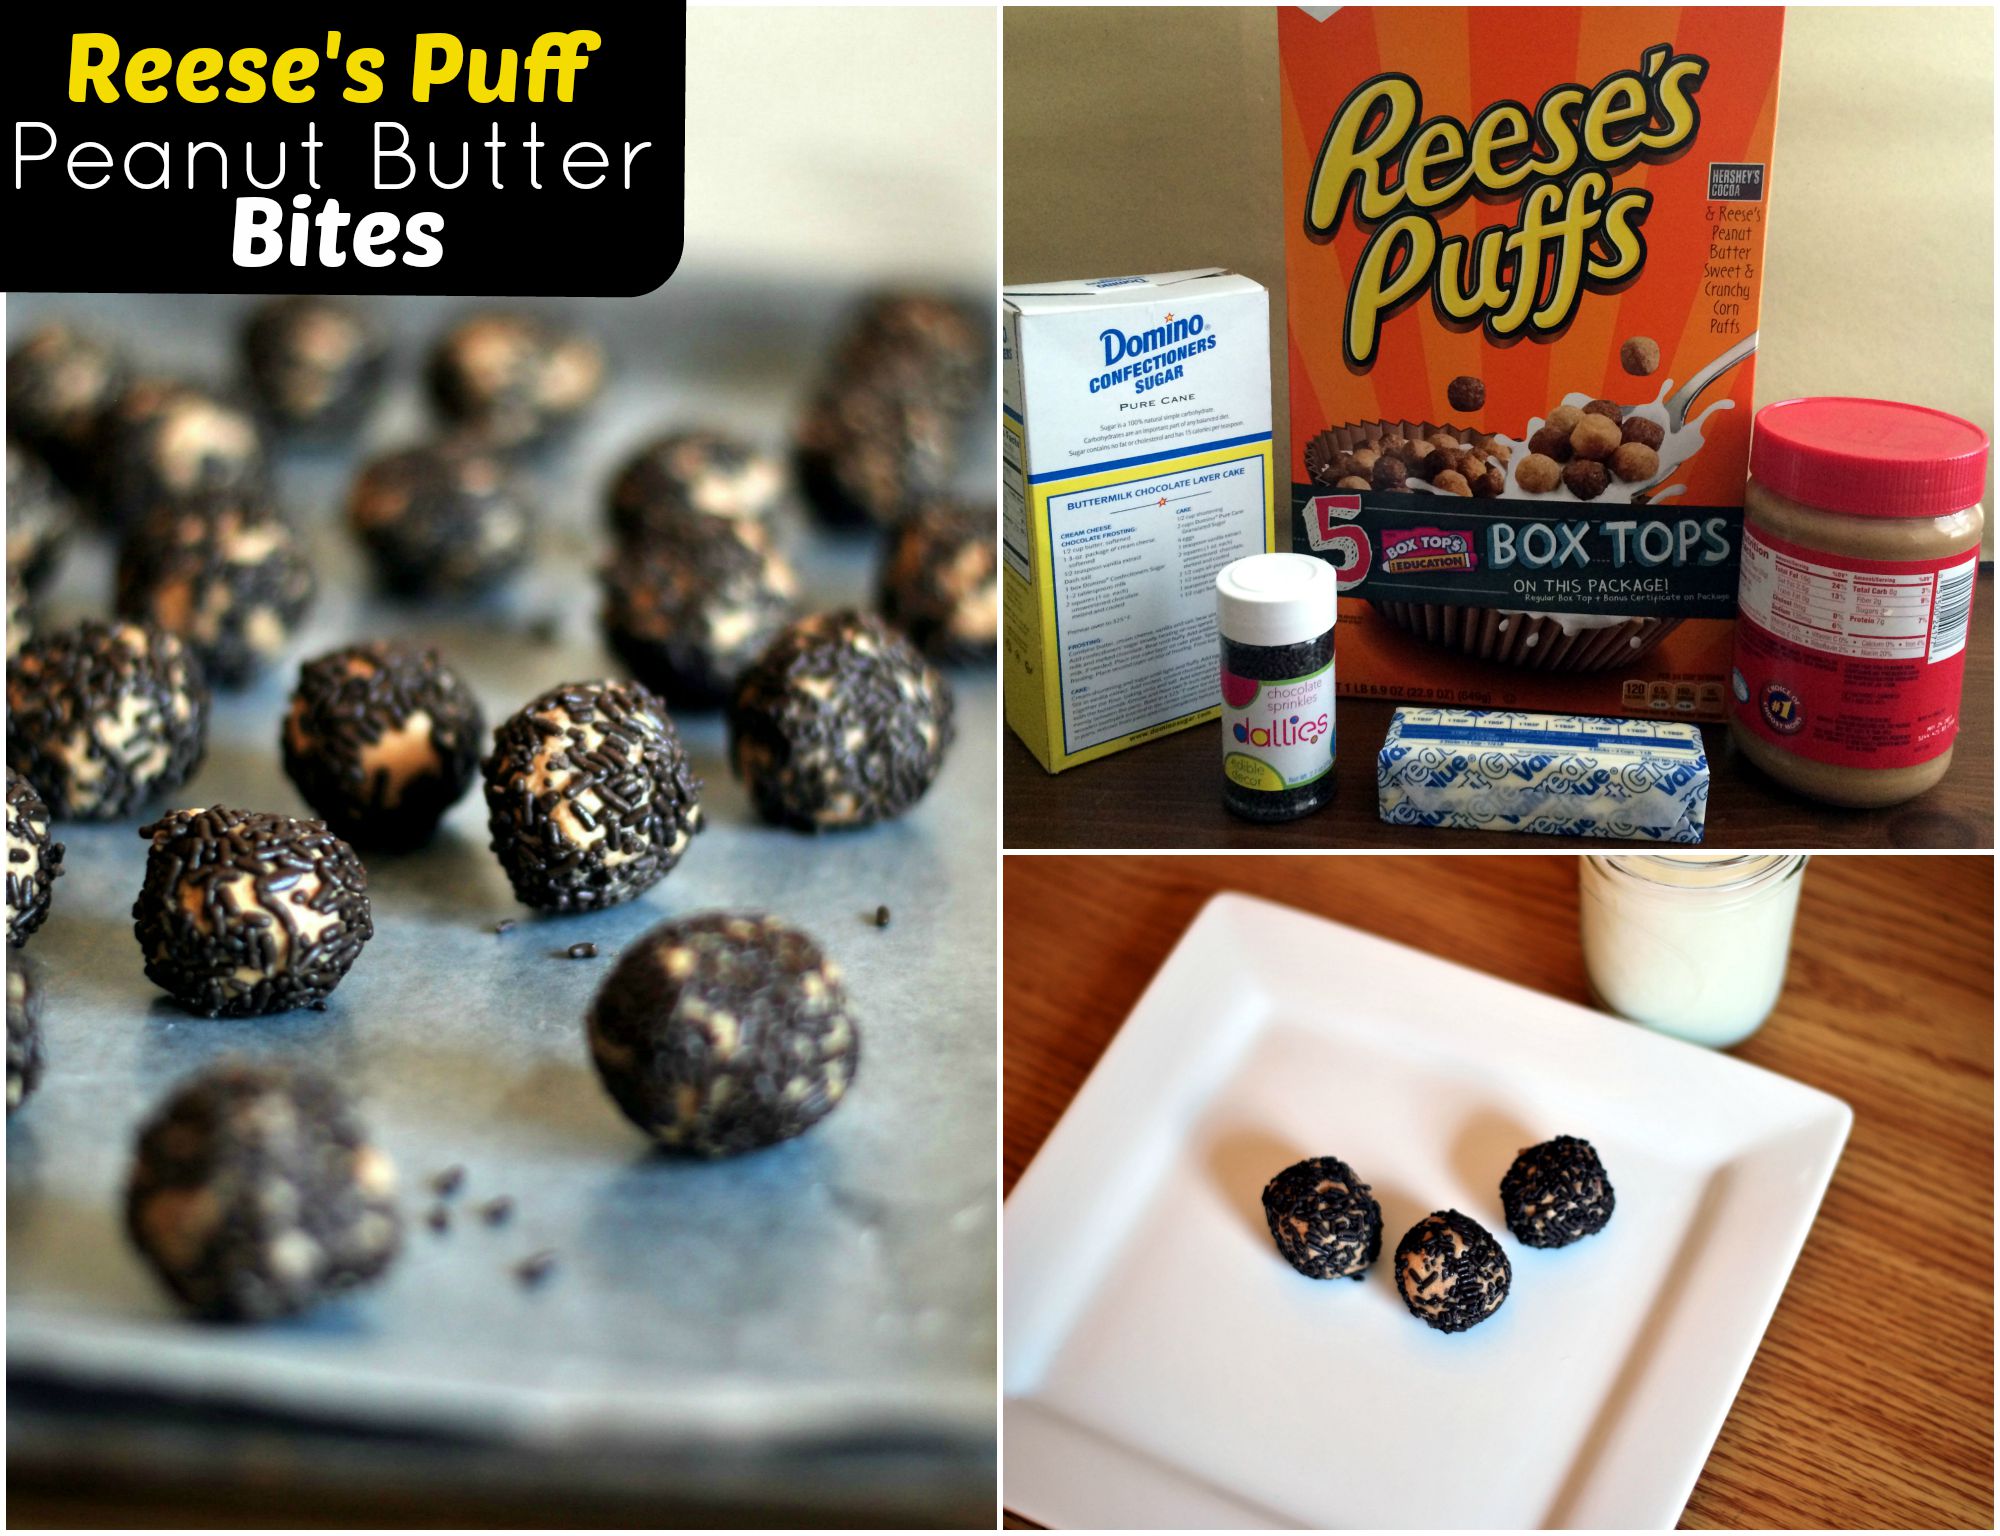 Reese’s Puff Peanut Butter Bites